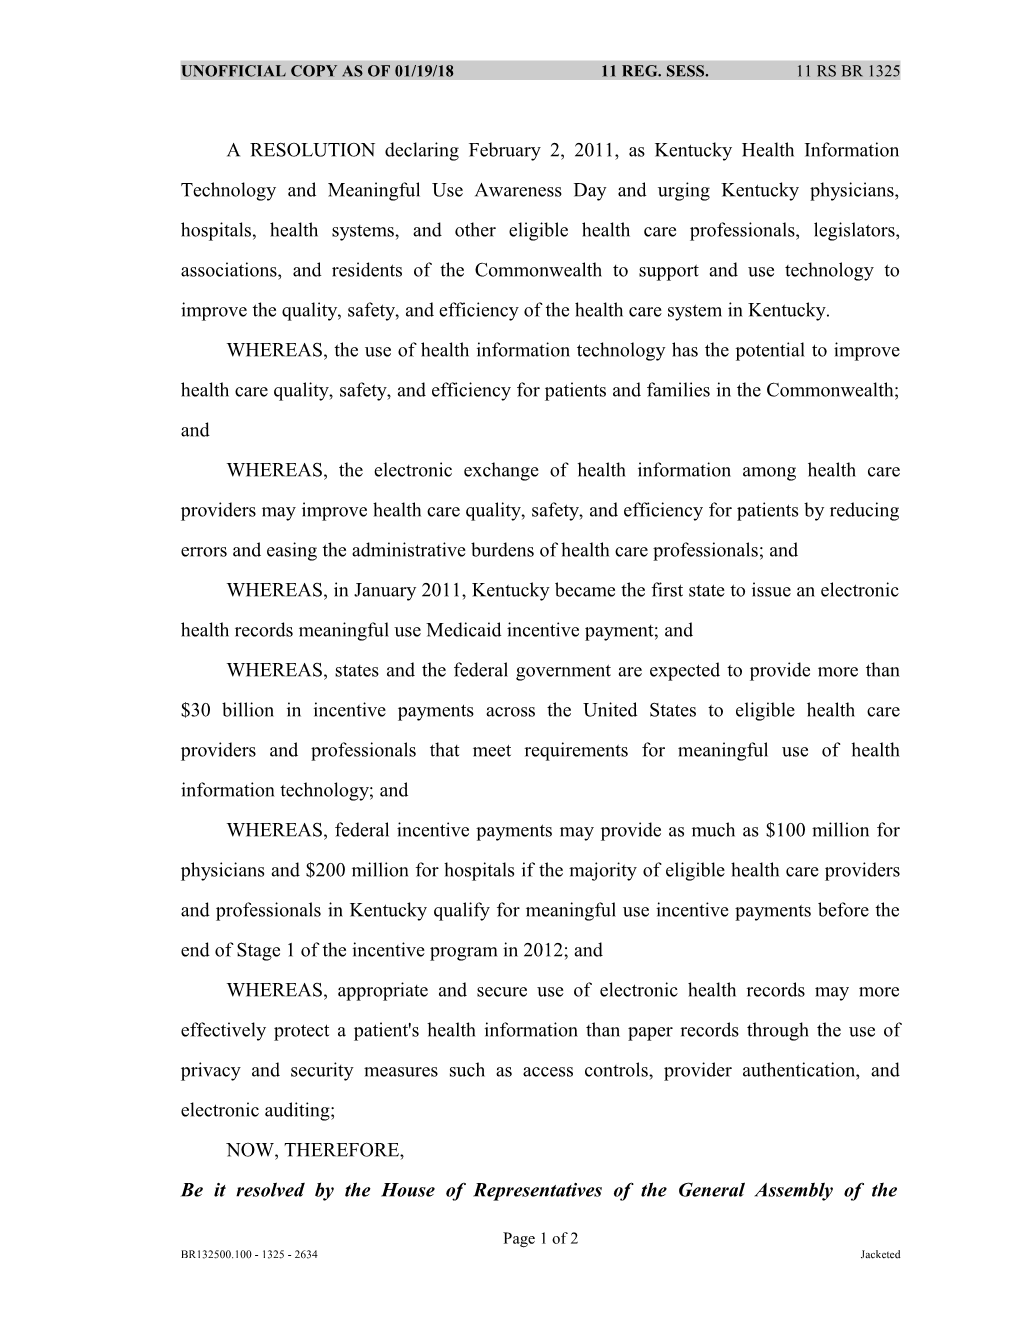 A RESOLUTION Declaring February 2, 2011, As Kentucky Health Information Technology And